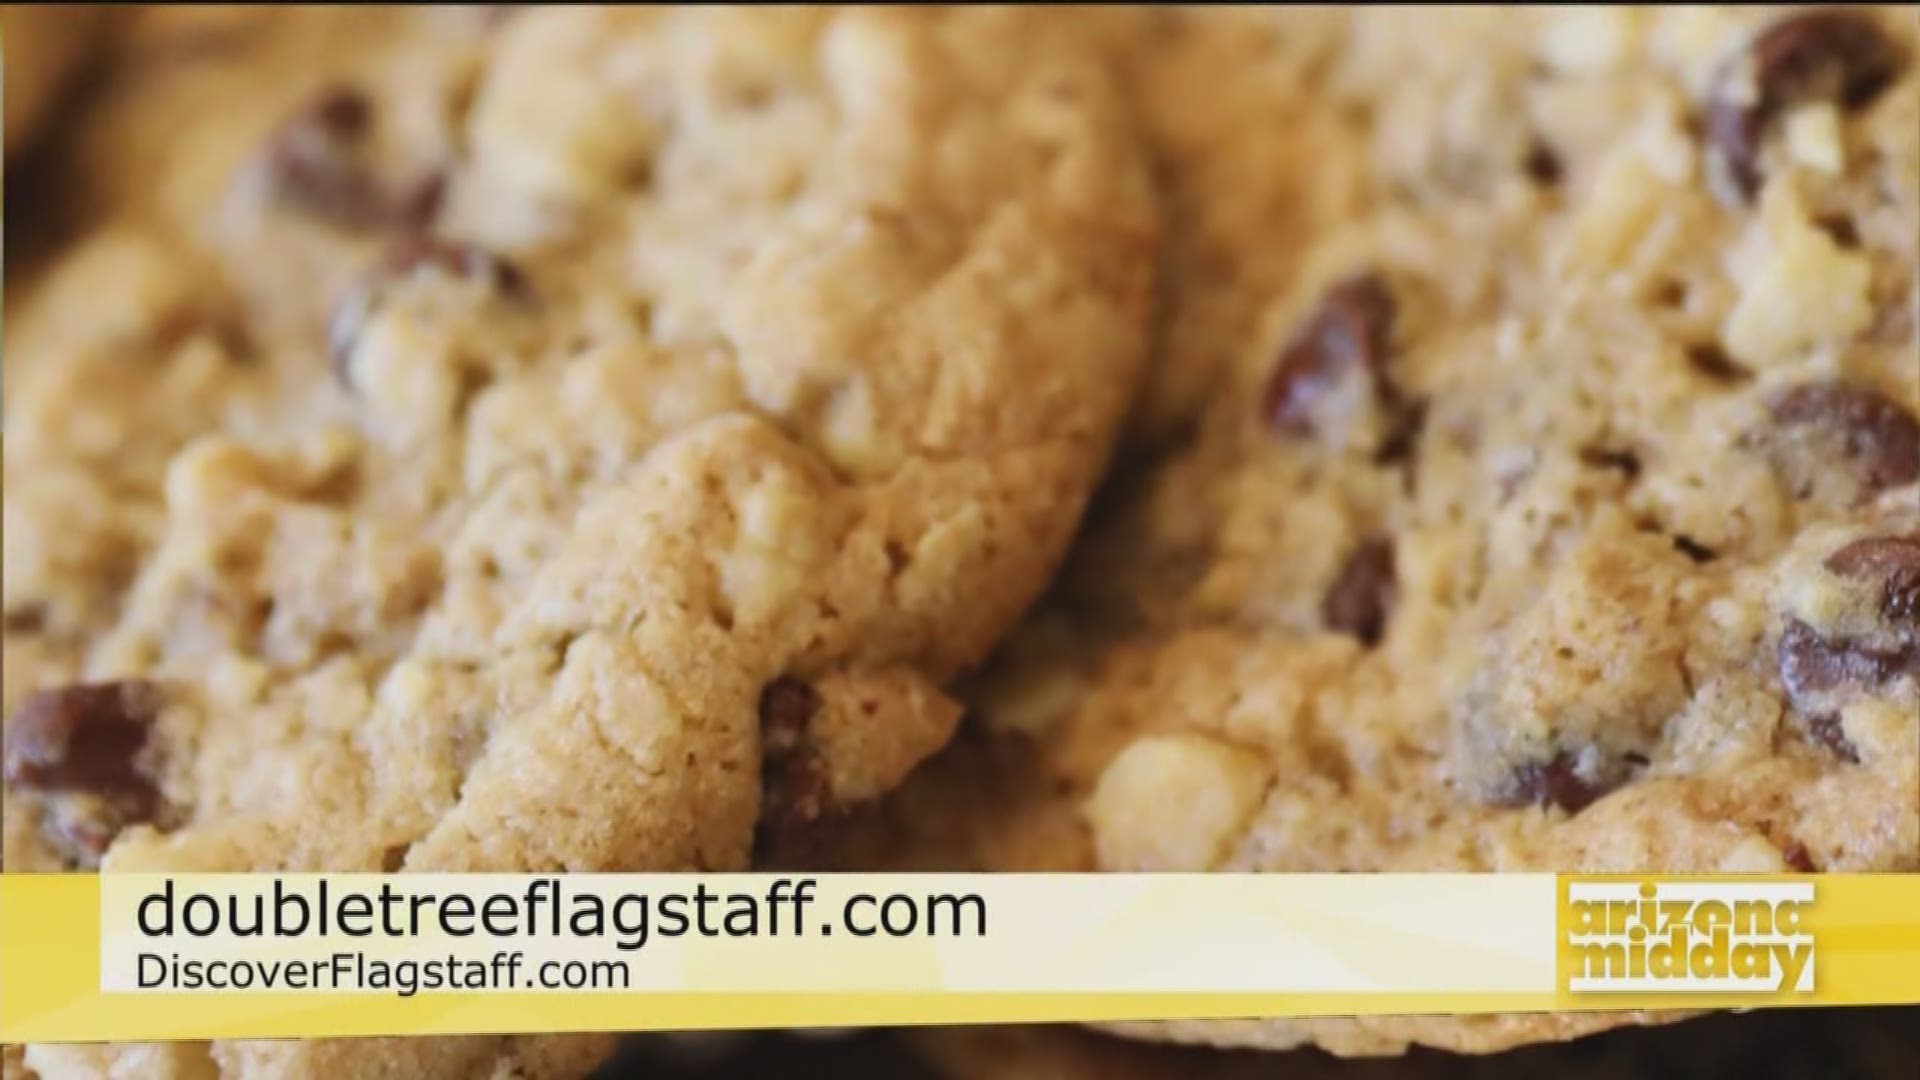 Jeff Theiss with Doubletree Flagstaff tells us about the comfort of Doubletree Hotels and how the cookies are headed to space